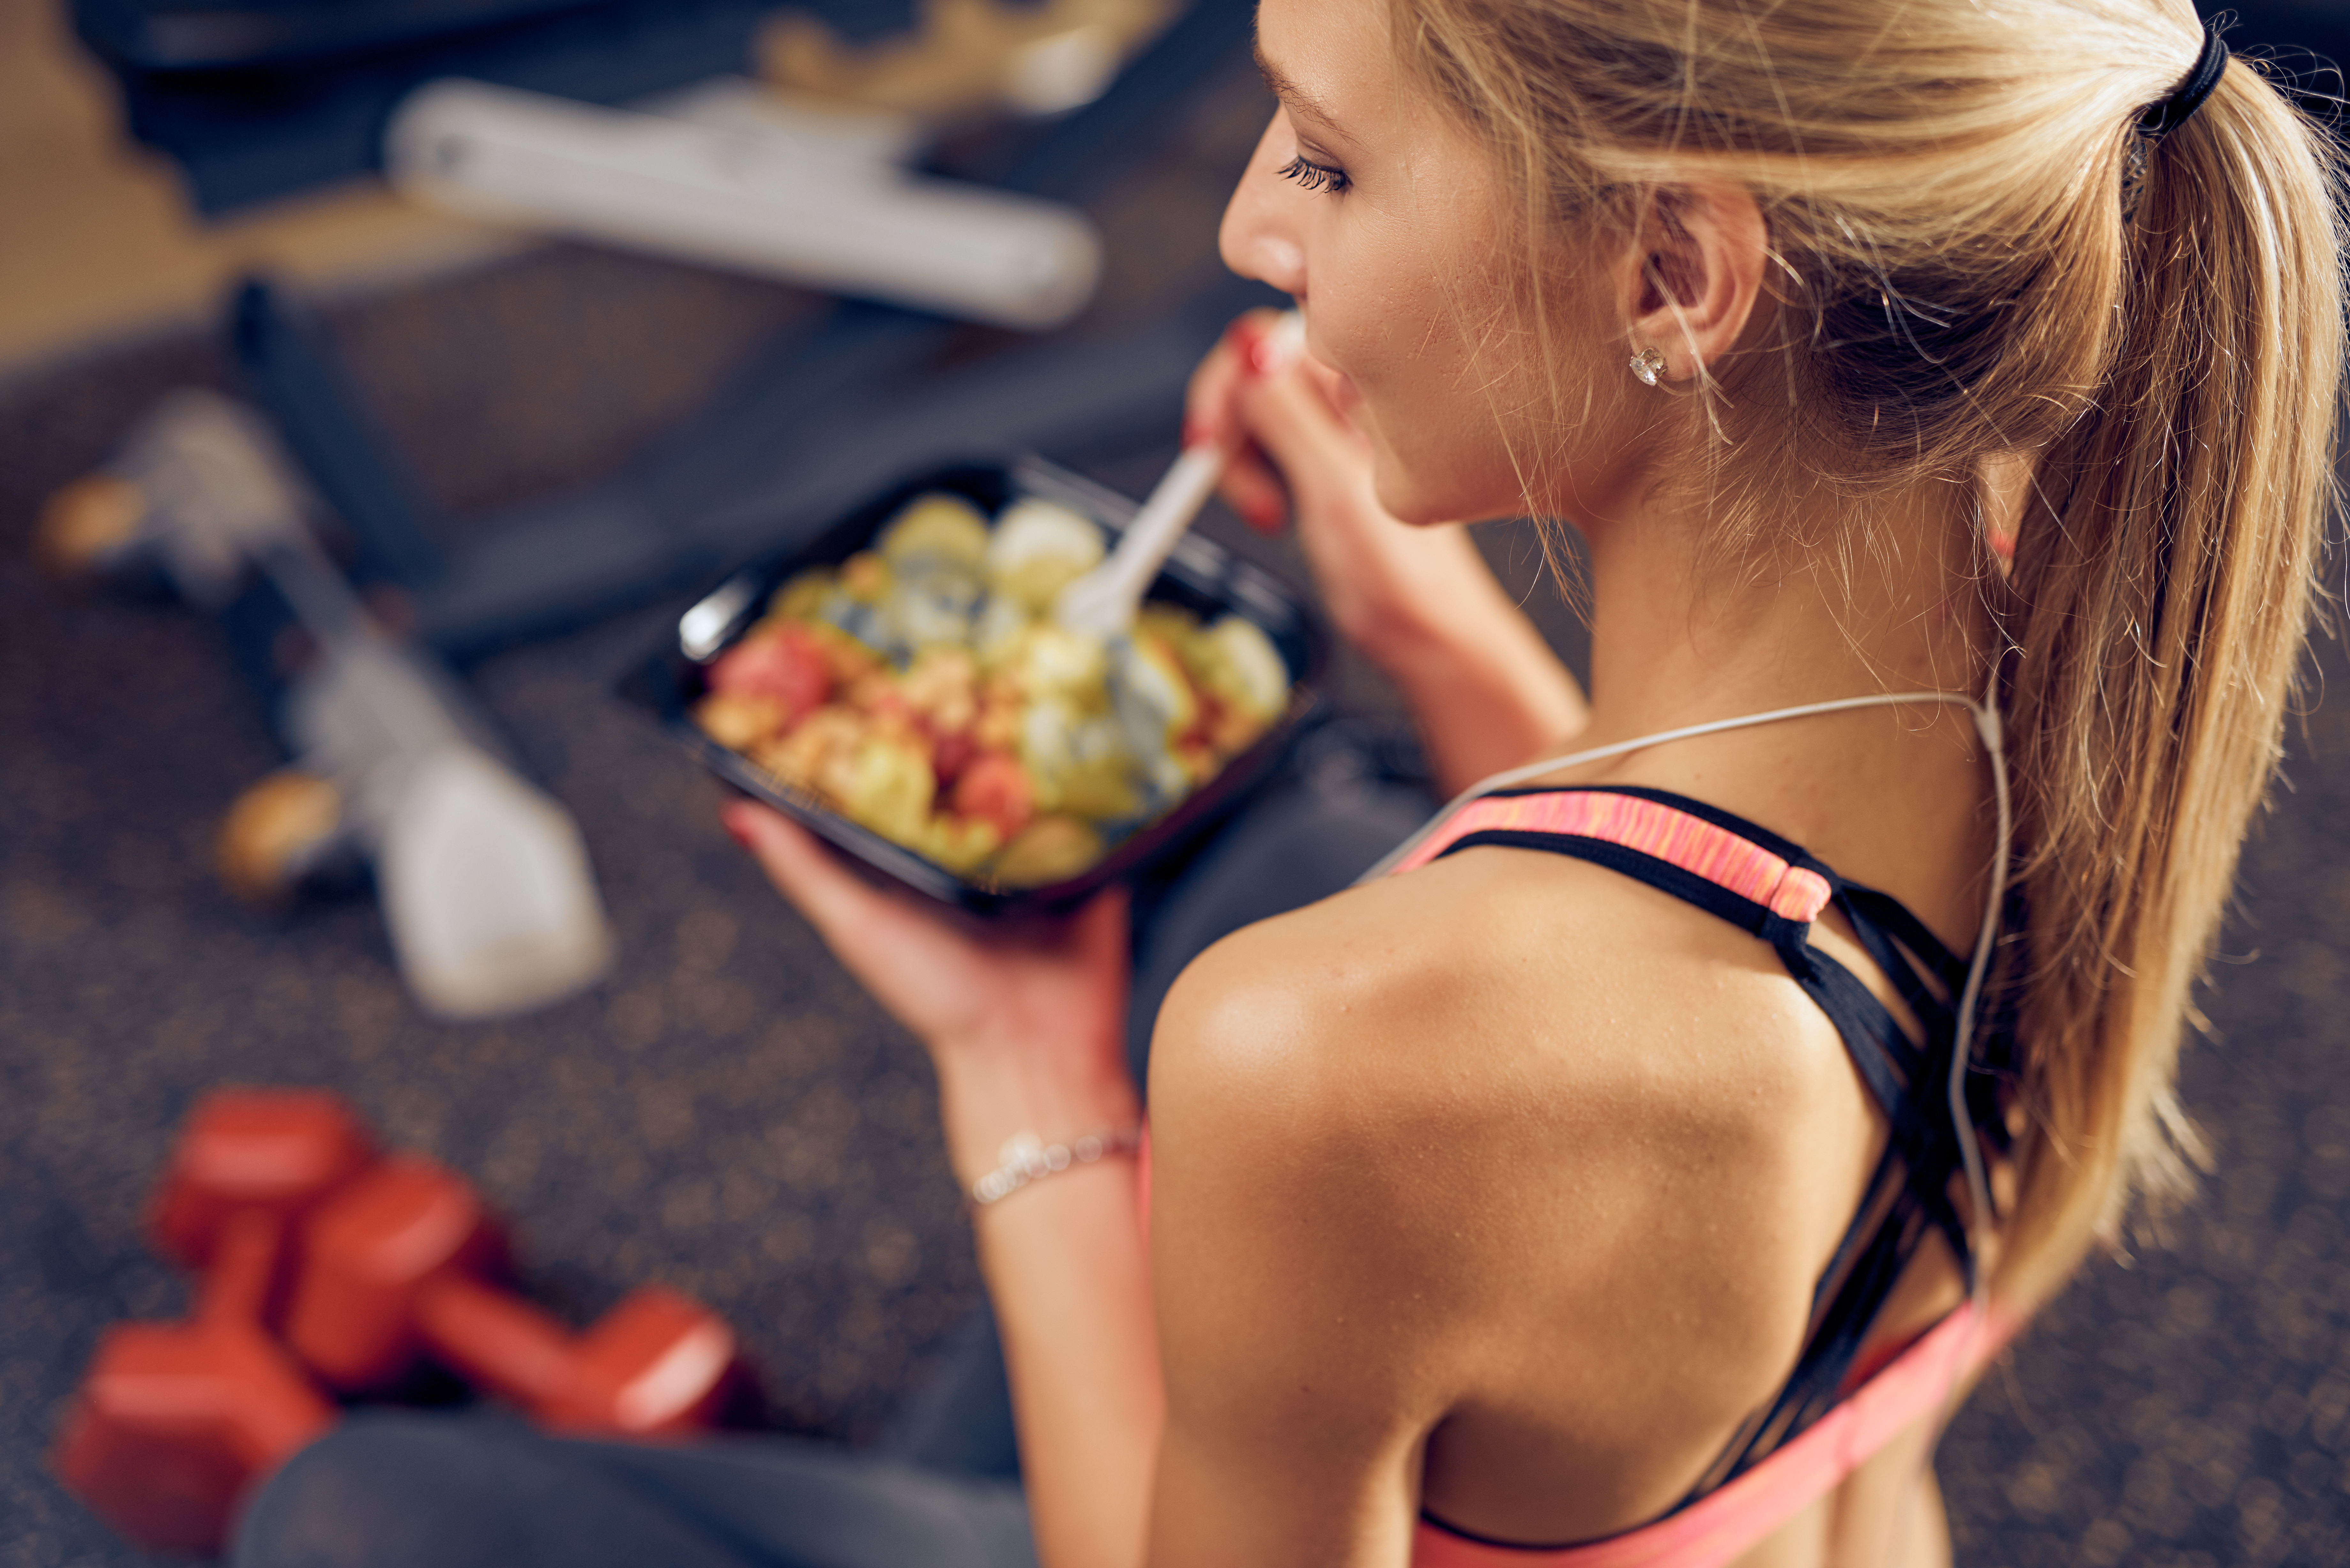 Young woman with tied back blonde hair sits in the gym, eating a bowl of high-carbohydrate salad as one of the best pre and post workout foods.